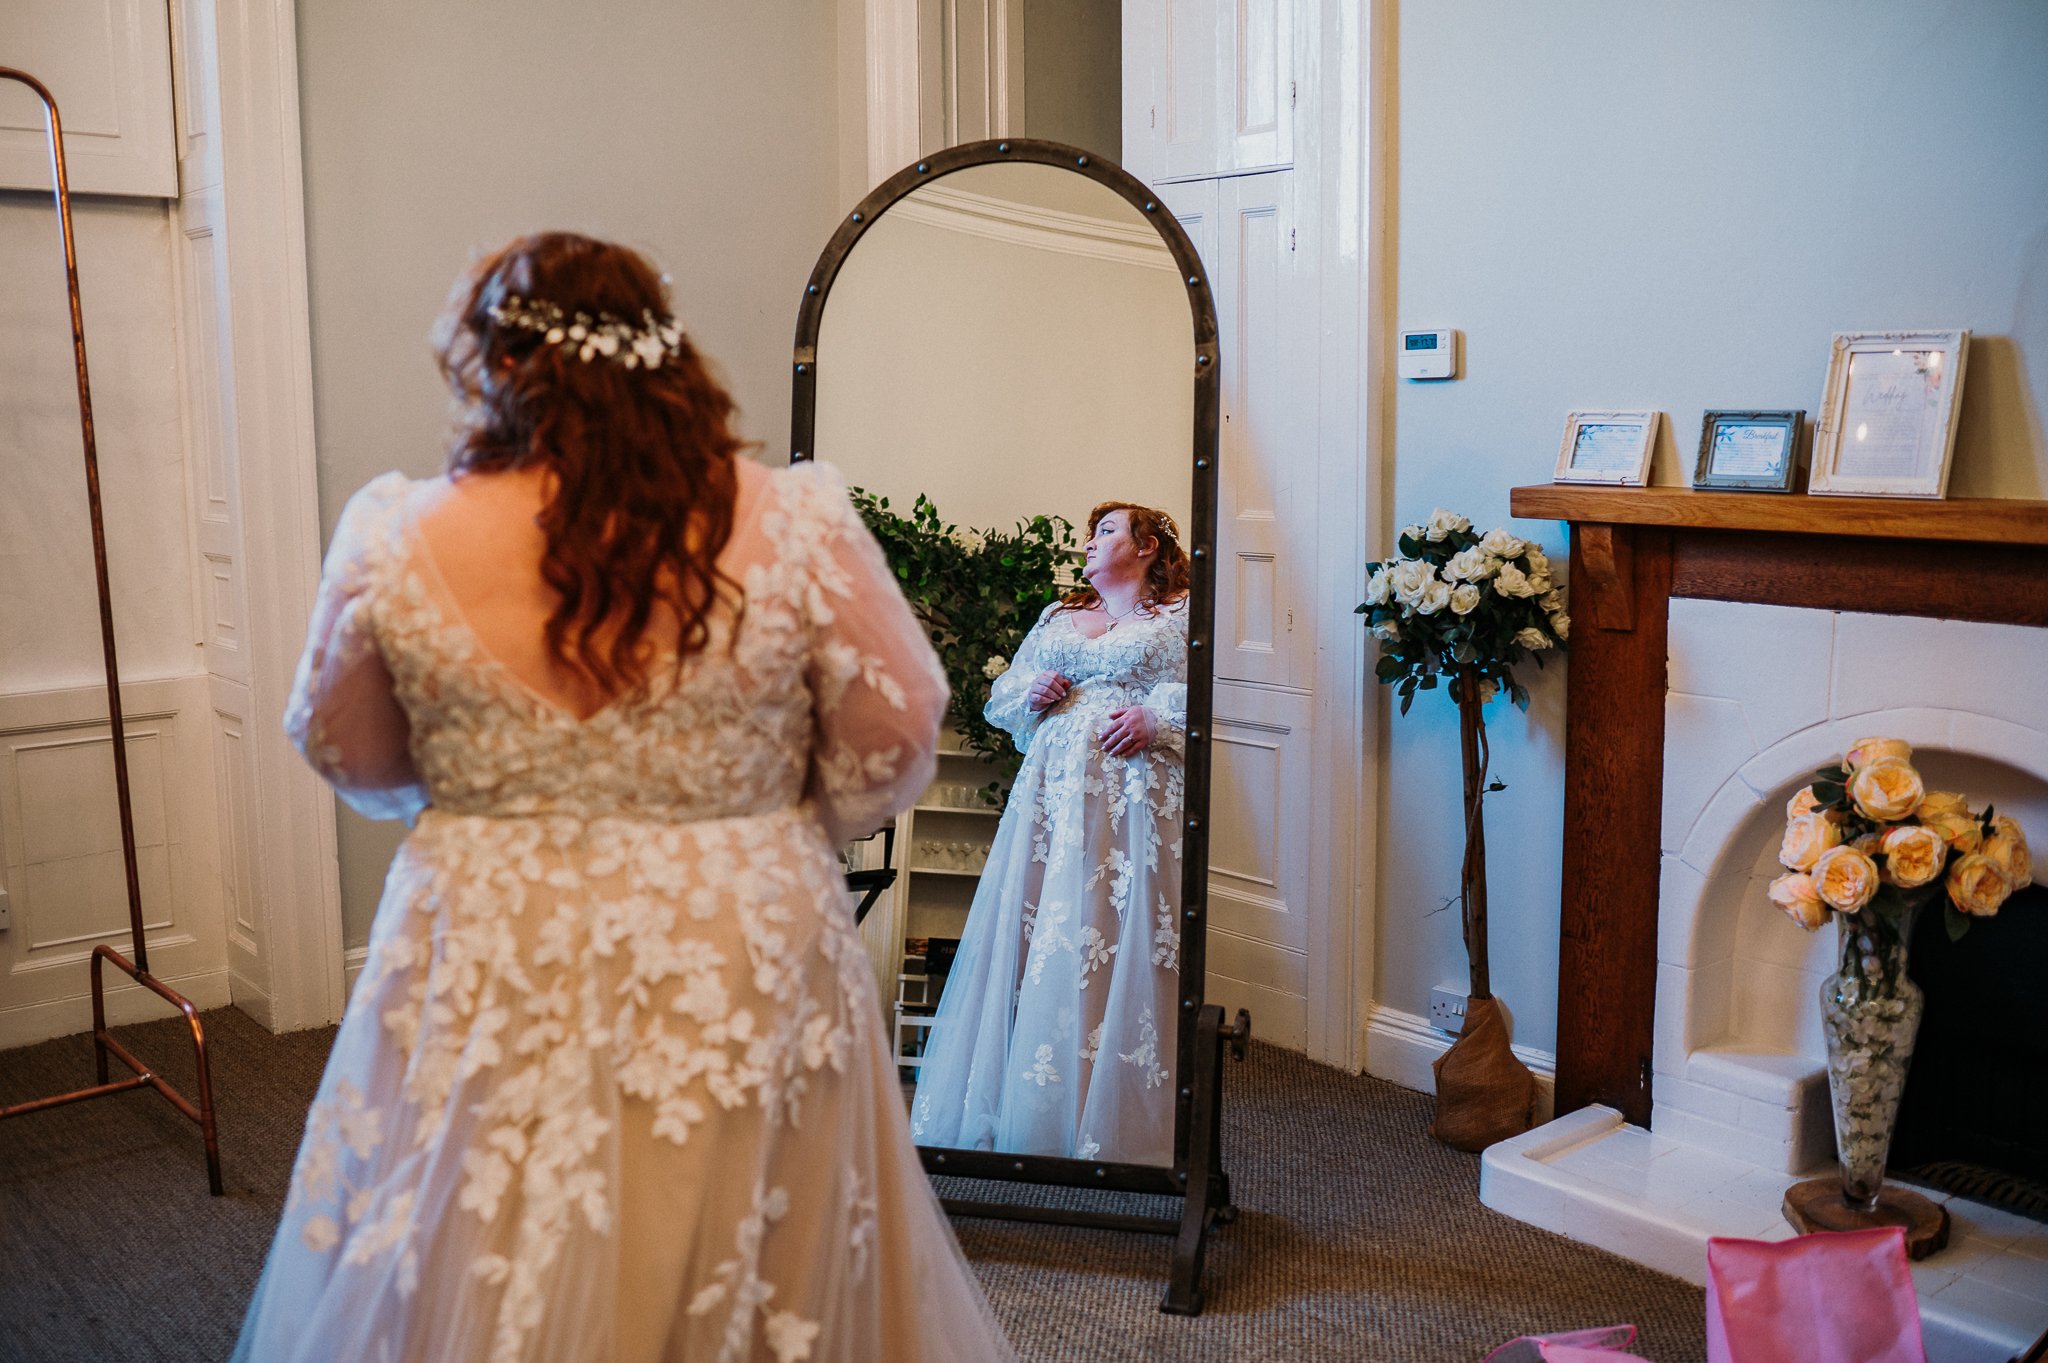 The bride checks her reflection in a mirror at Sneaton Castle, Whitby.